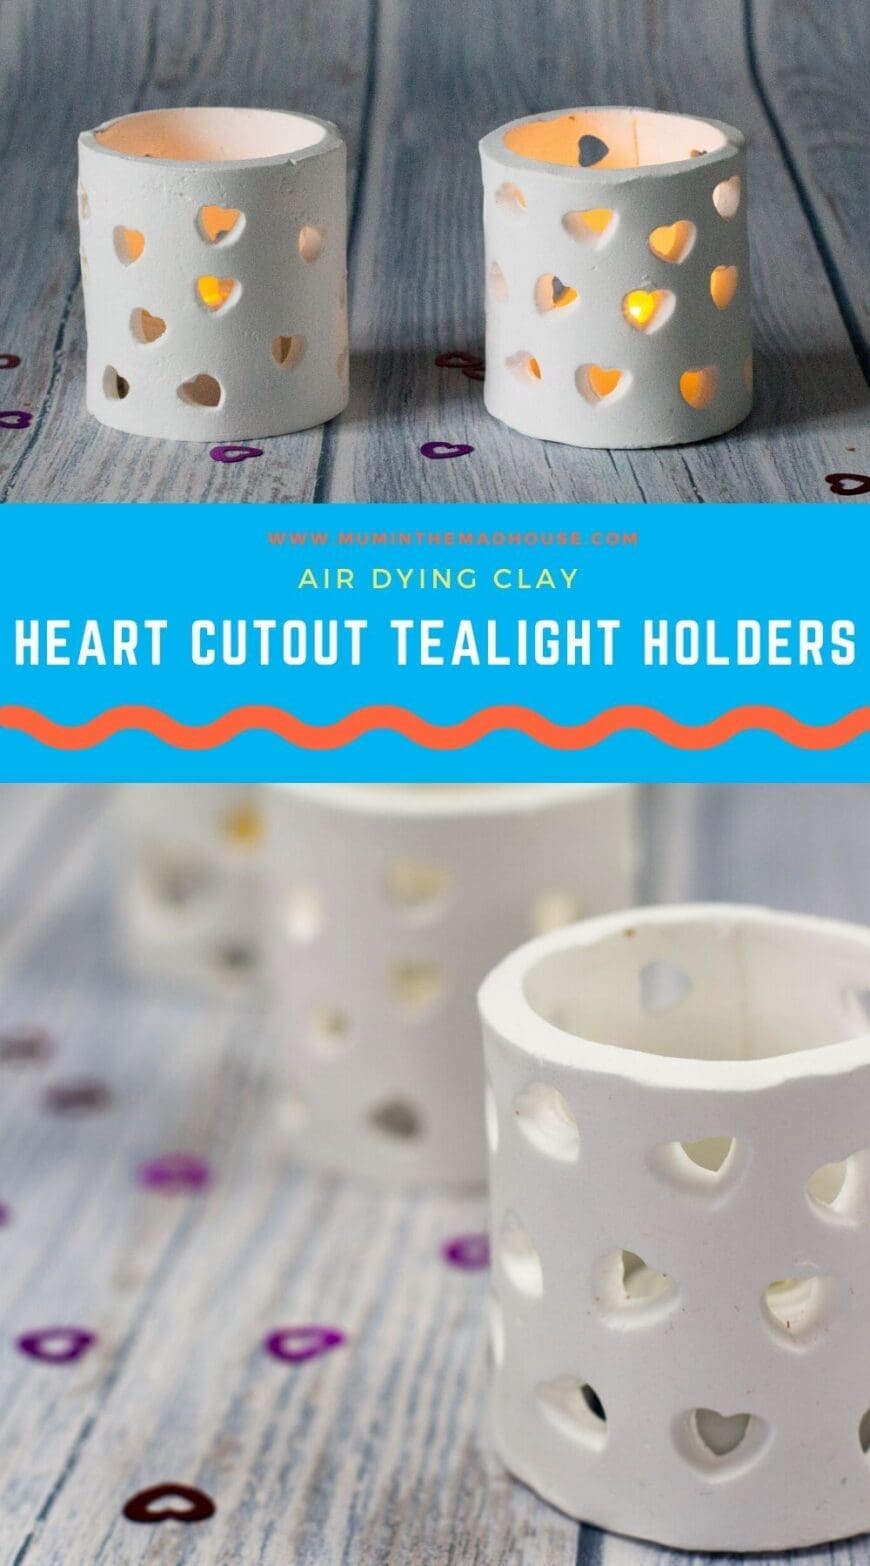 How to make clay tealight holders